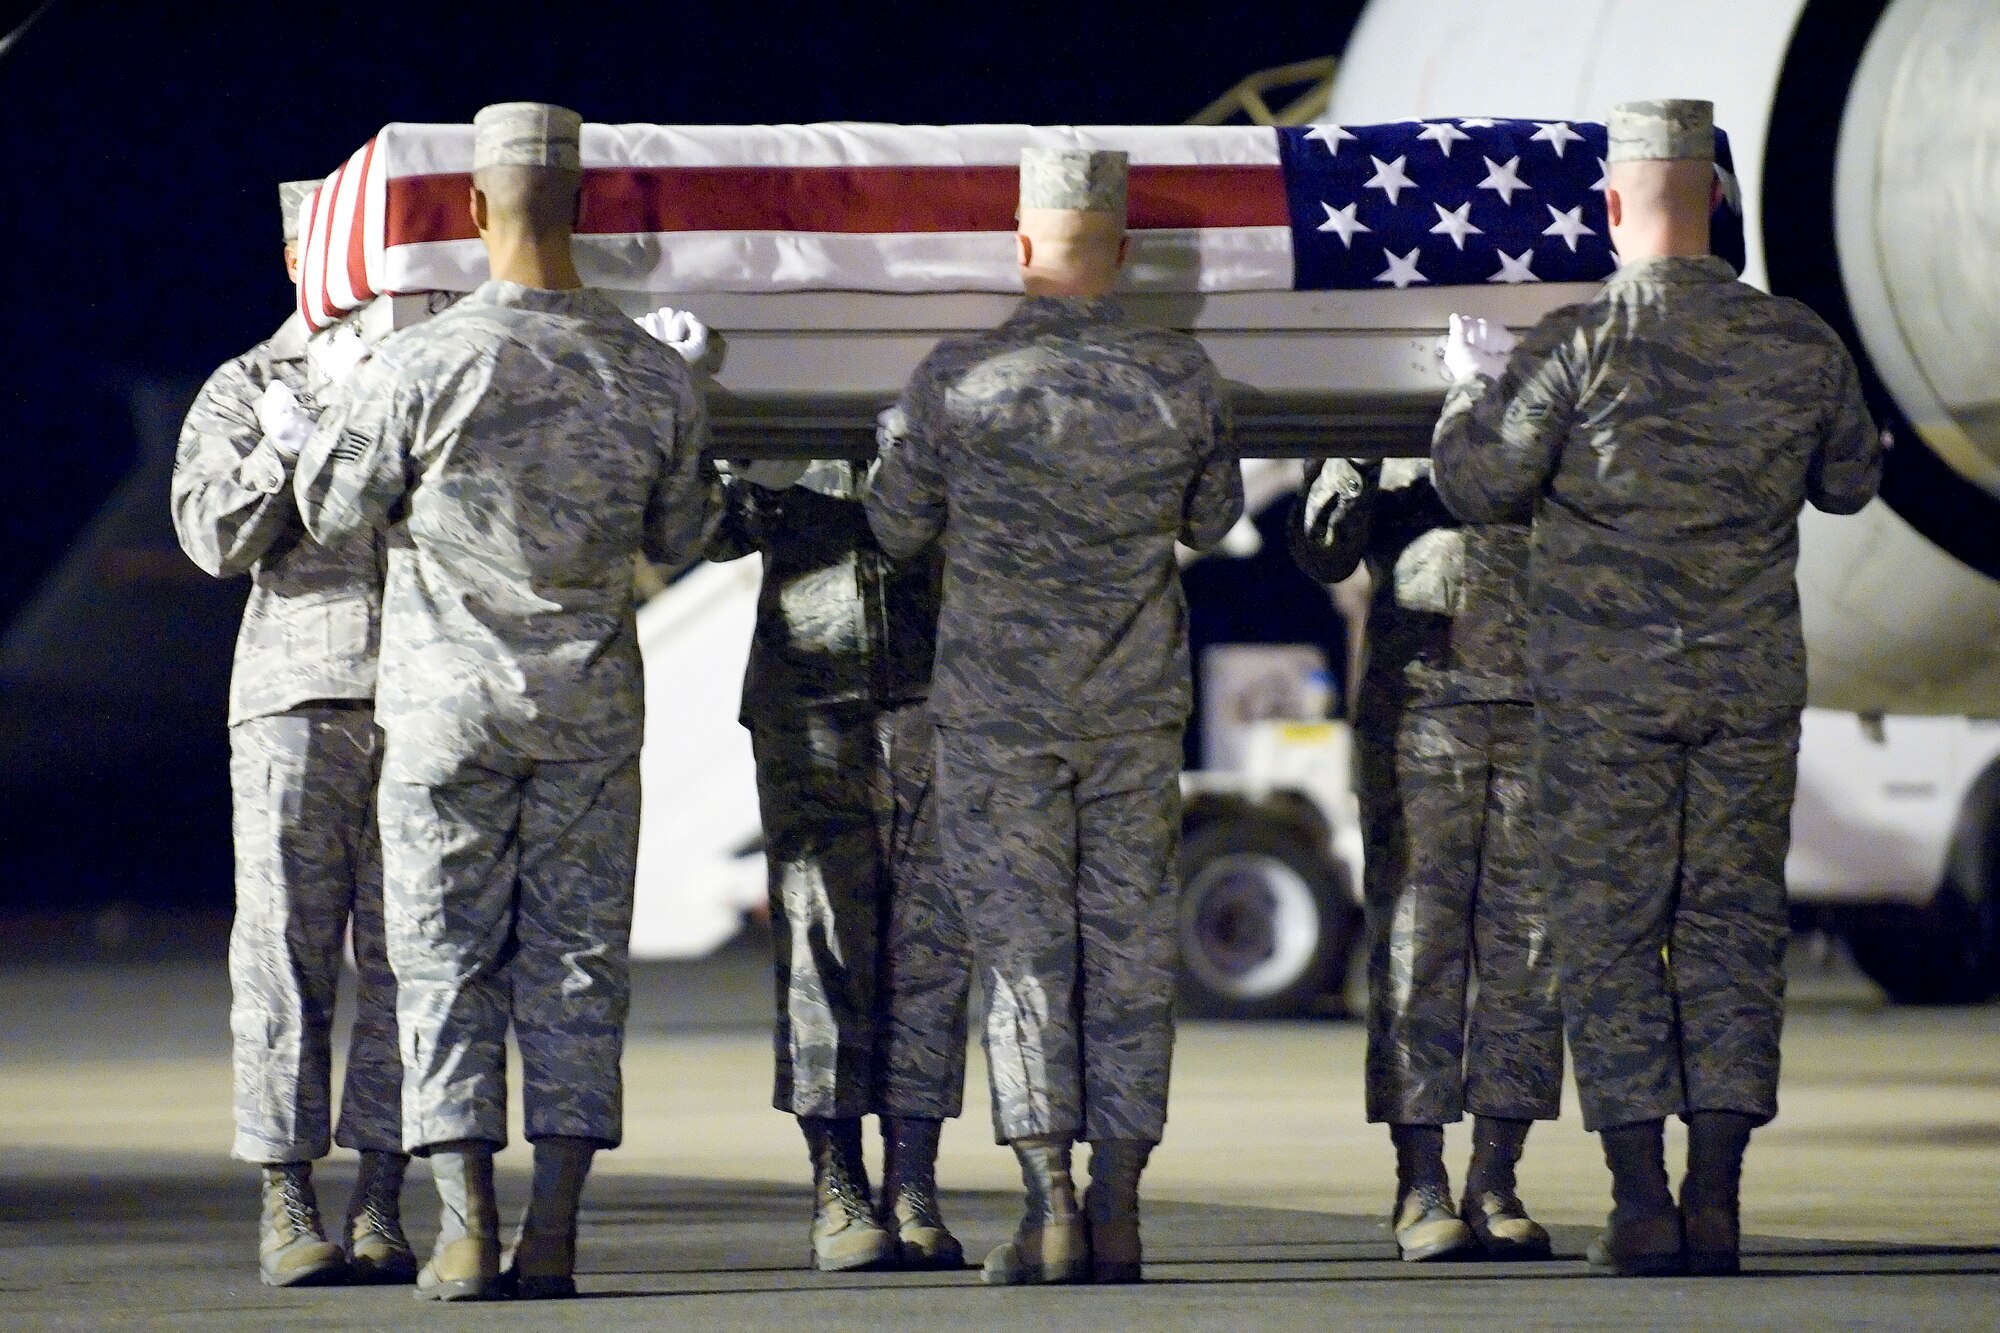 A U.S. Air Force carry team transfers the remains of Air Force Capt. Nicholas S. Whitlock of Newnan, Ga., at Dover Air Force Base, Del., Feb. 21, 2012. Whitlock was assigned to the 34th Special Operations Squadron, Hurlburt Field, Fla. (U.S. Air Force photo/Adrian R. Rowan)
